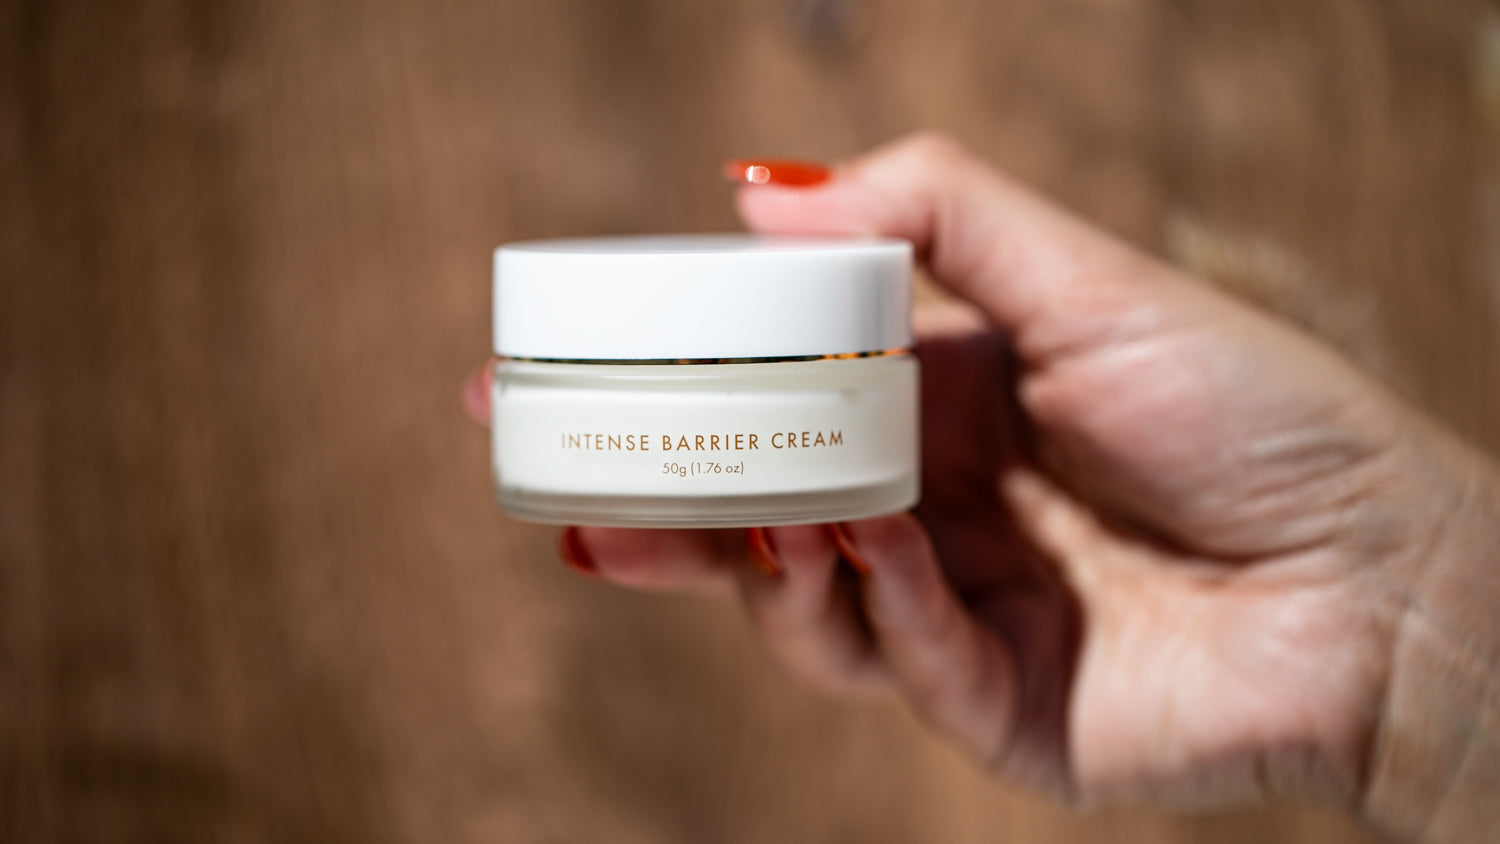 A jar of Sonia Roselli Beauty's Intense Barrier Cream takes the spotlight in this product photo. Its sleek packaging and pristine appearance convey the promise of powerful and protective skincare, offering a nourishing shield for your skin